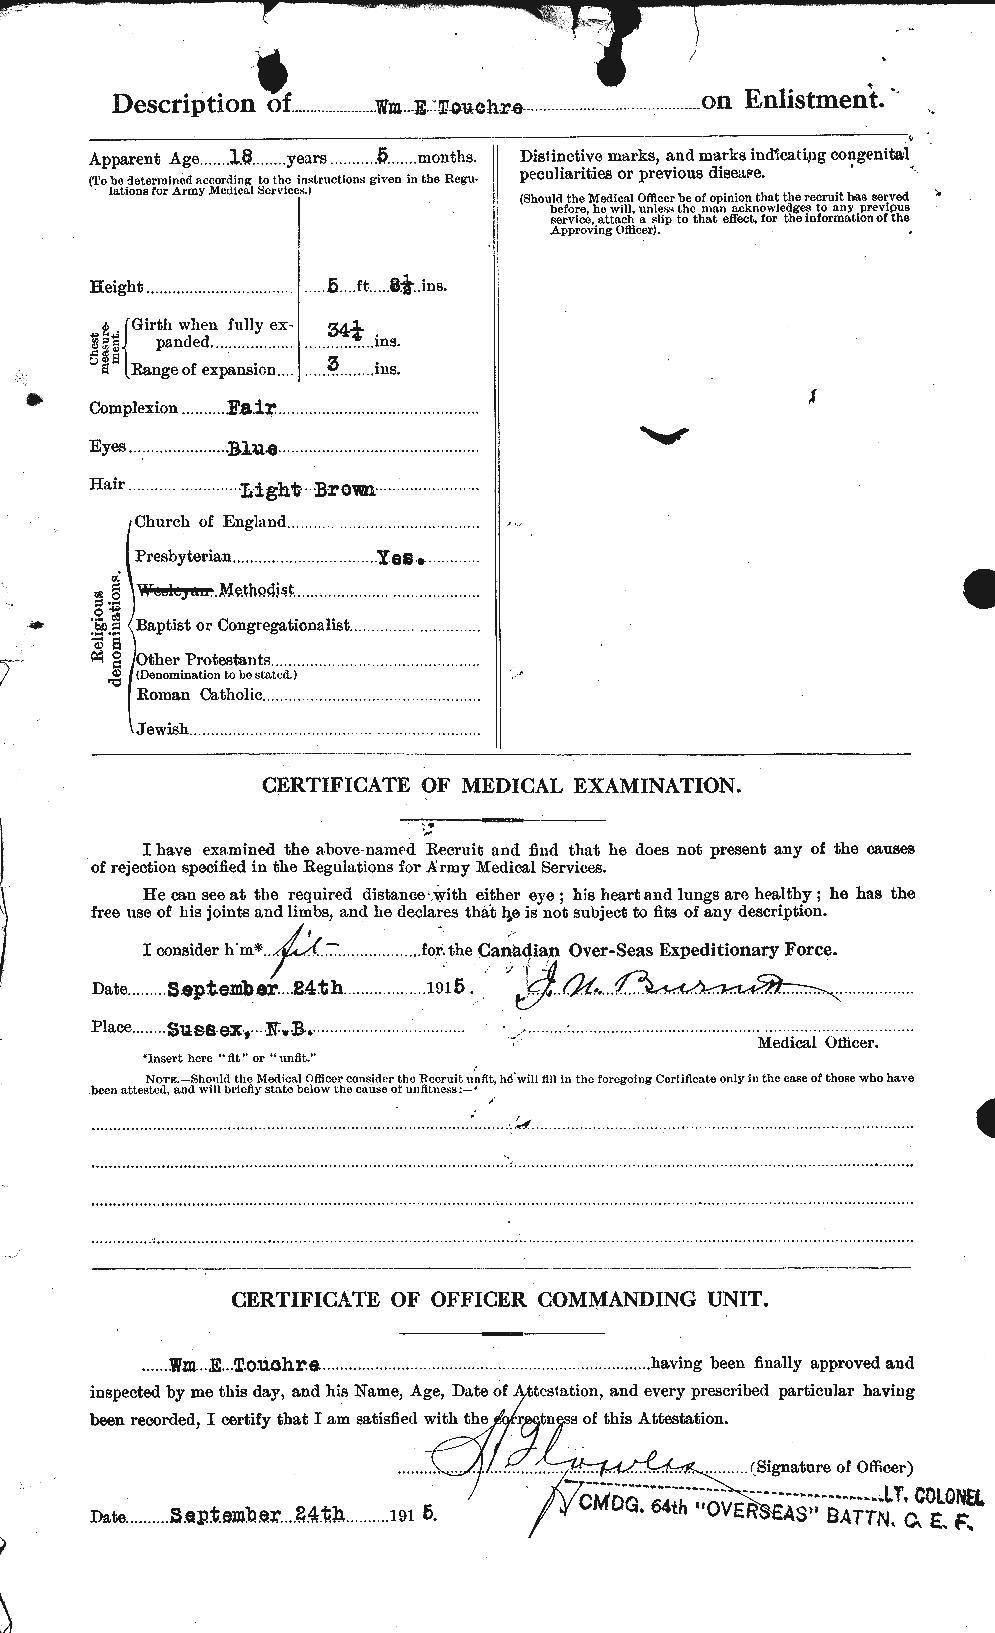 Personnel Records of the First World War - CEF 650133b